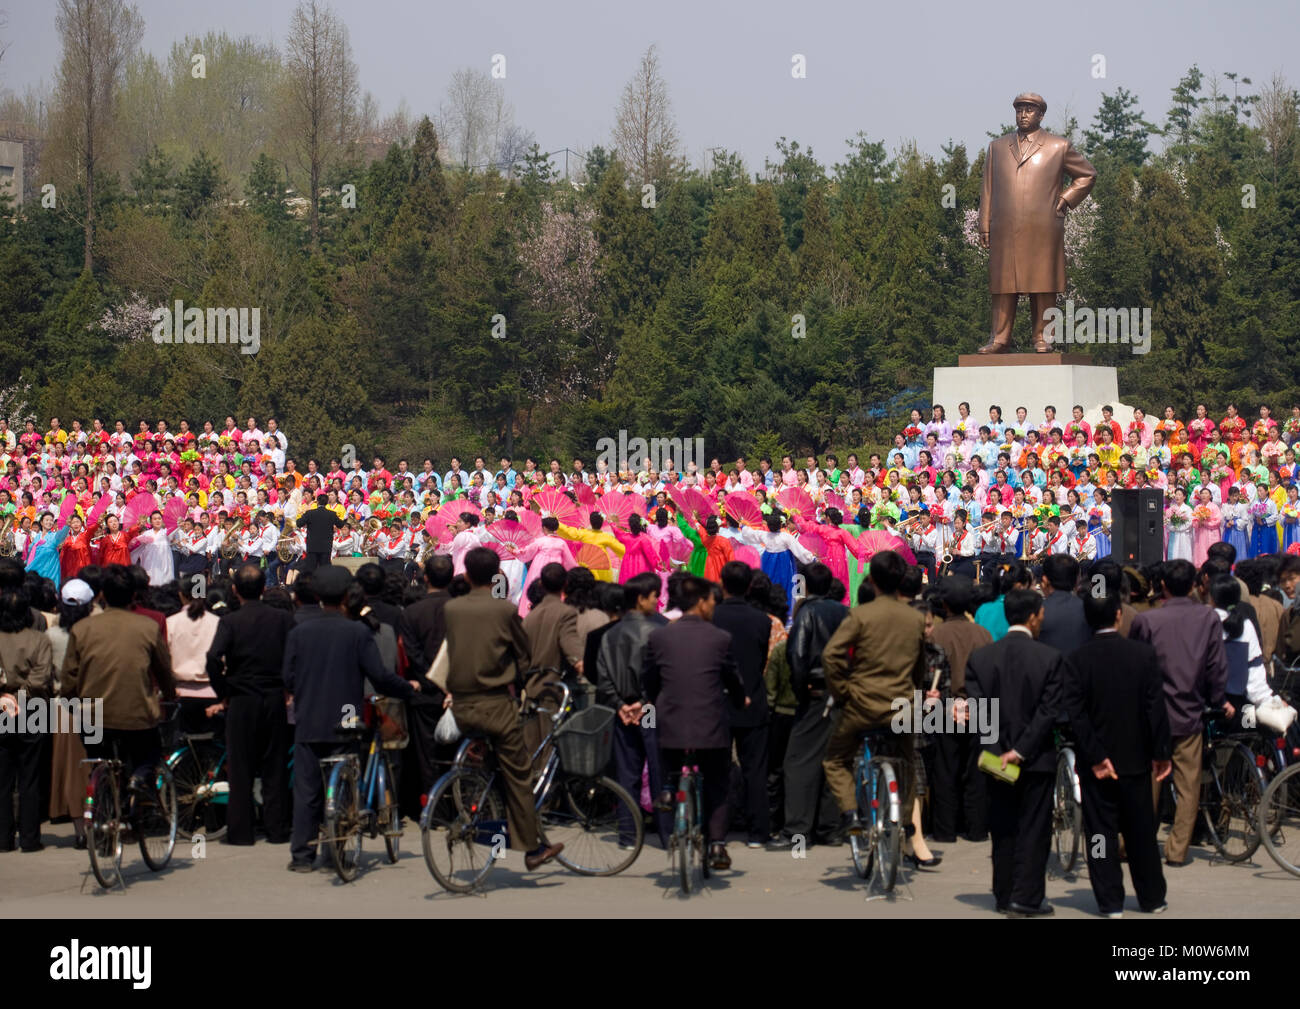 North Korean women dancing and singing in front of Kim il Sung statue in a village, South Pyongan Province, Nampo, North Korea Stock Photo